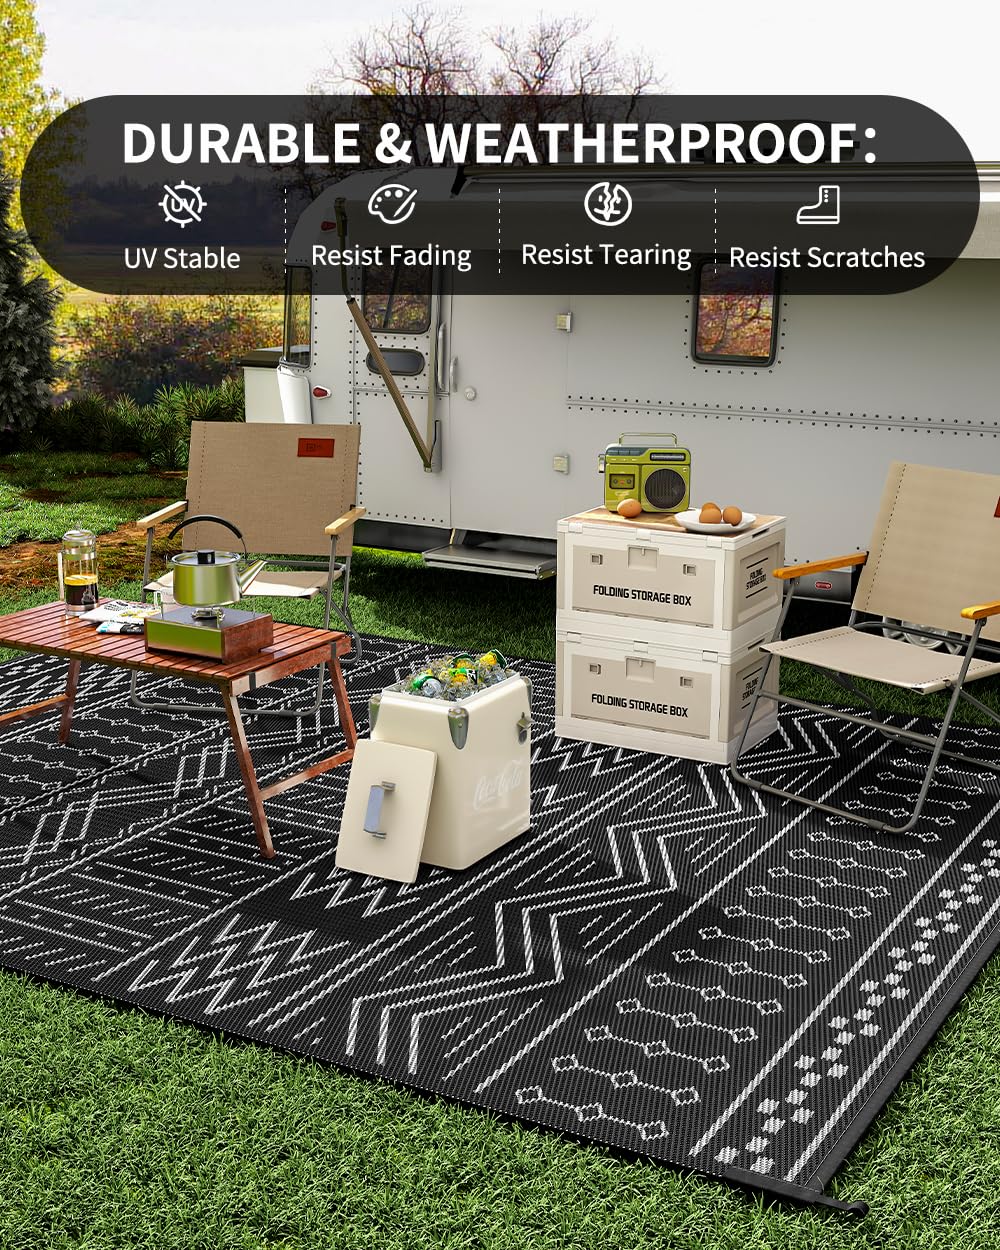 Outdoor Rug Carpet Waterproof 5x8 ft Patio Rug Mat Indoor Outdoor Area Rug for RV Camping Picnic Reversible Lightweight Plastic Straw Outside Rug for Patio Decor Decoration Boho Rug Black White